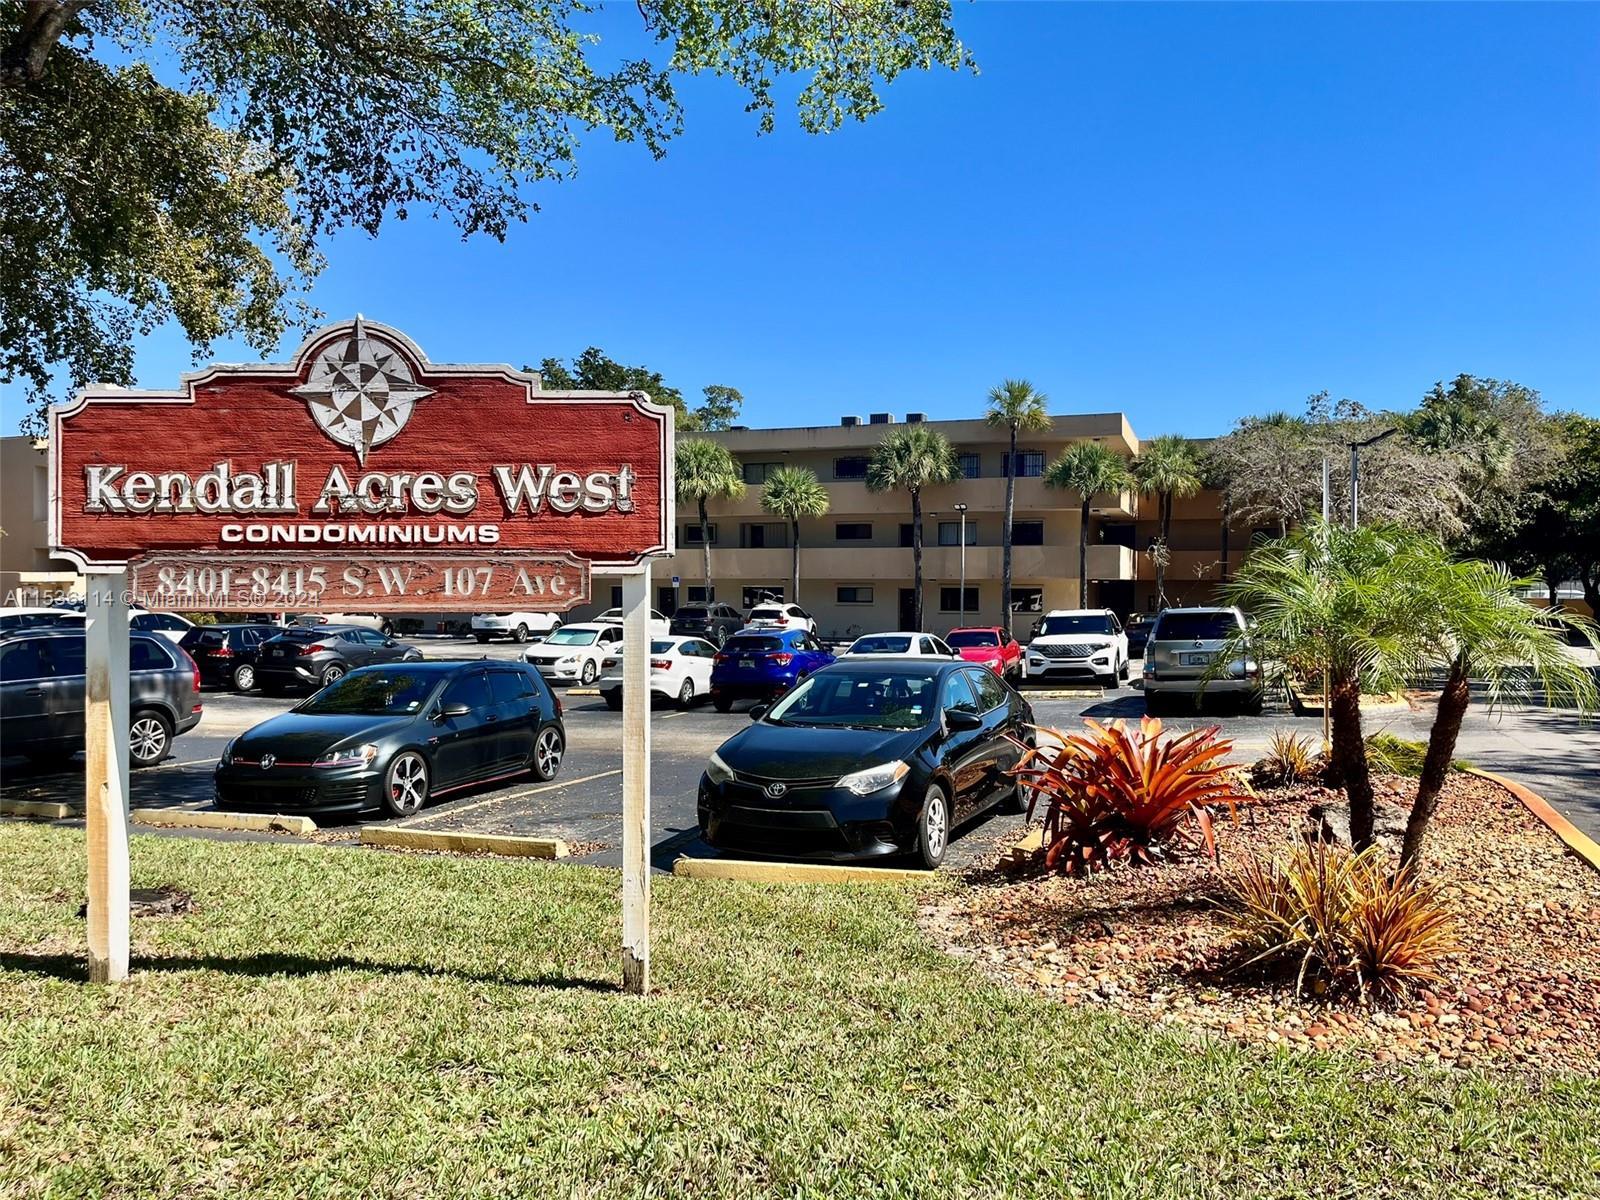 Discover serenity in Kendall Acres West! This inviting 1-bed, 1.5-bath apartment offers modern comfo